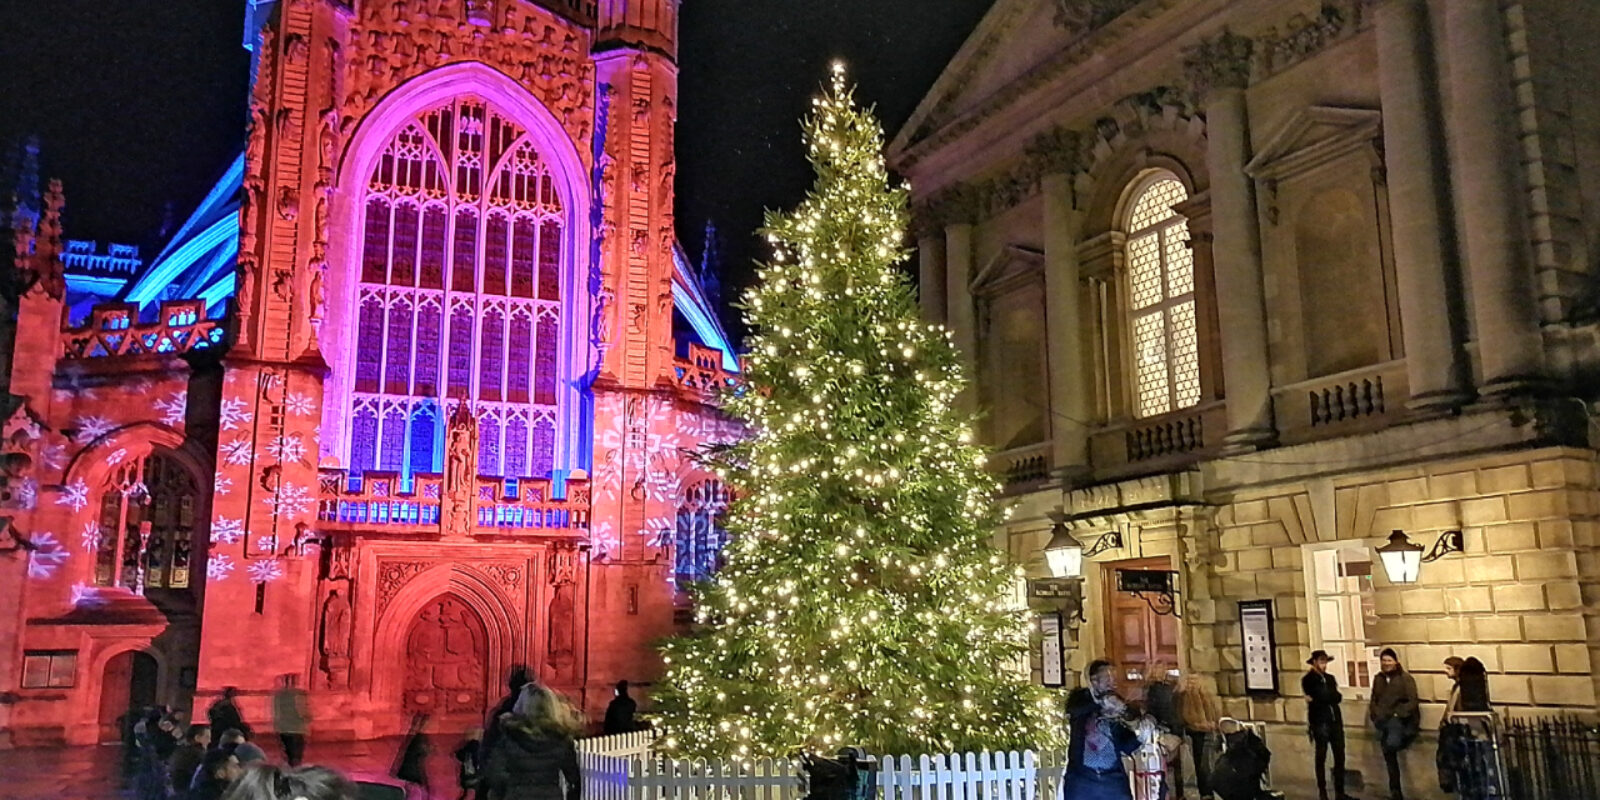 The Bath Abbey in Red and Christmas Tree